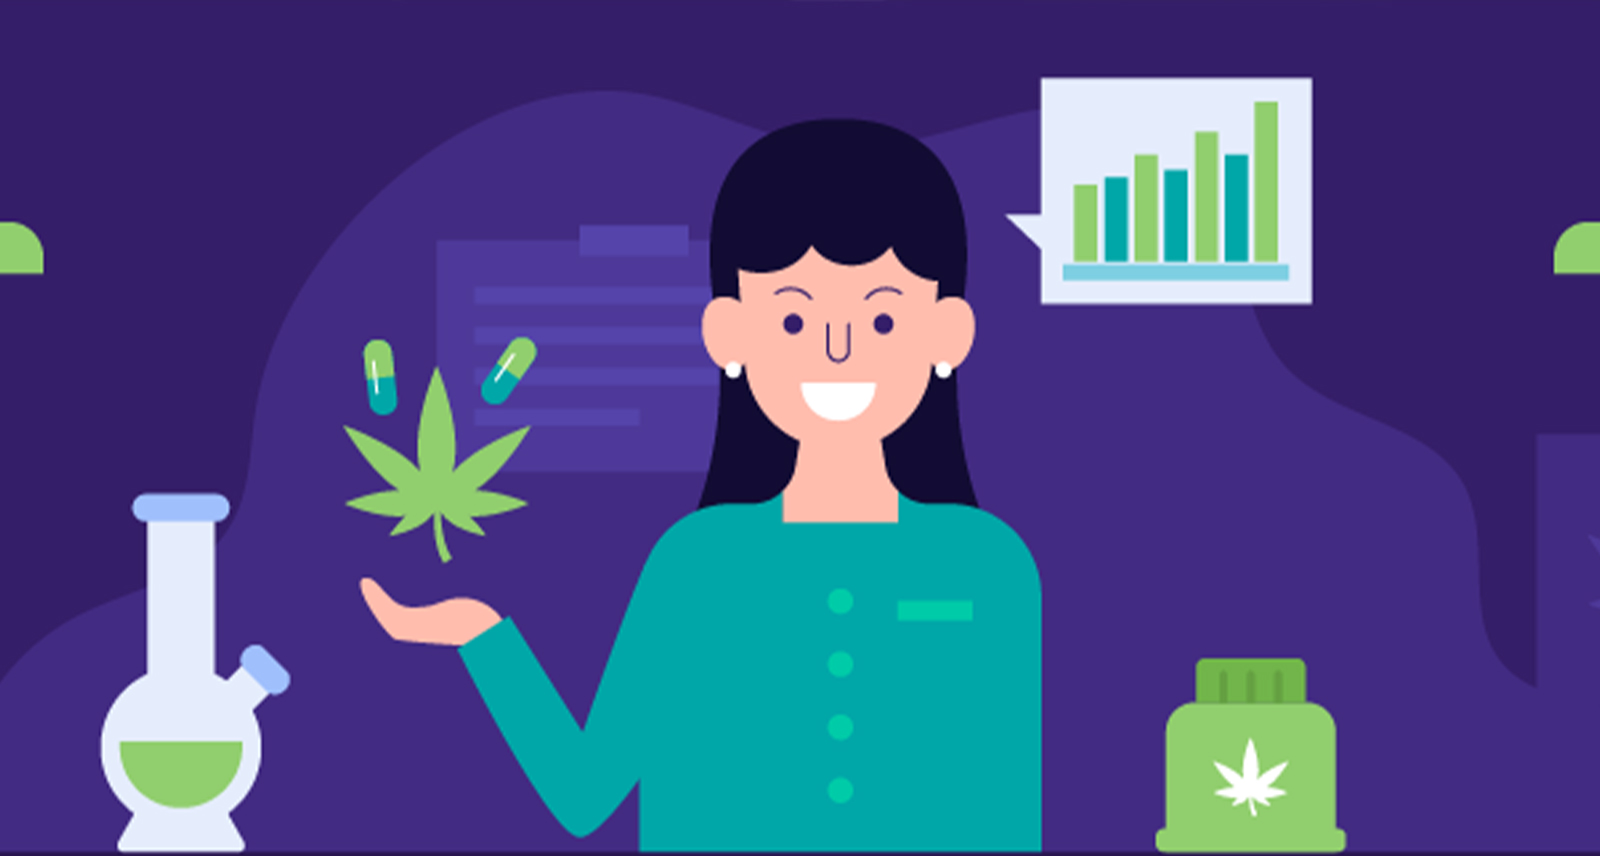 80 Stats About the Marijuana Industry (Infographic)